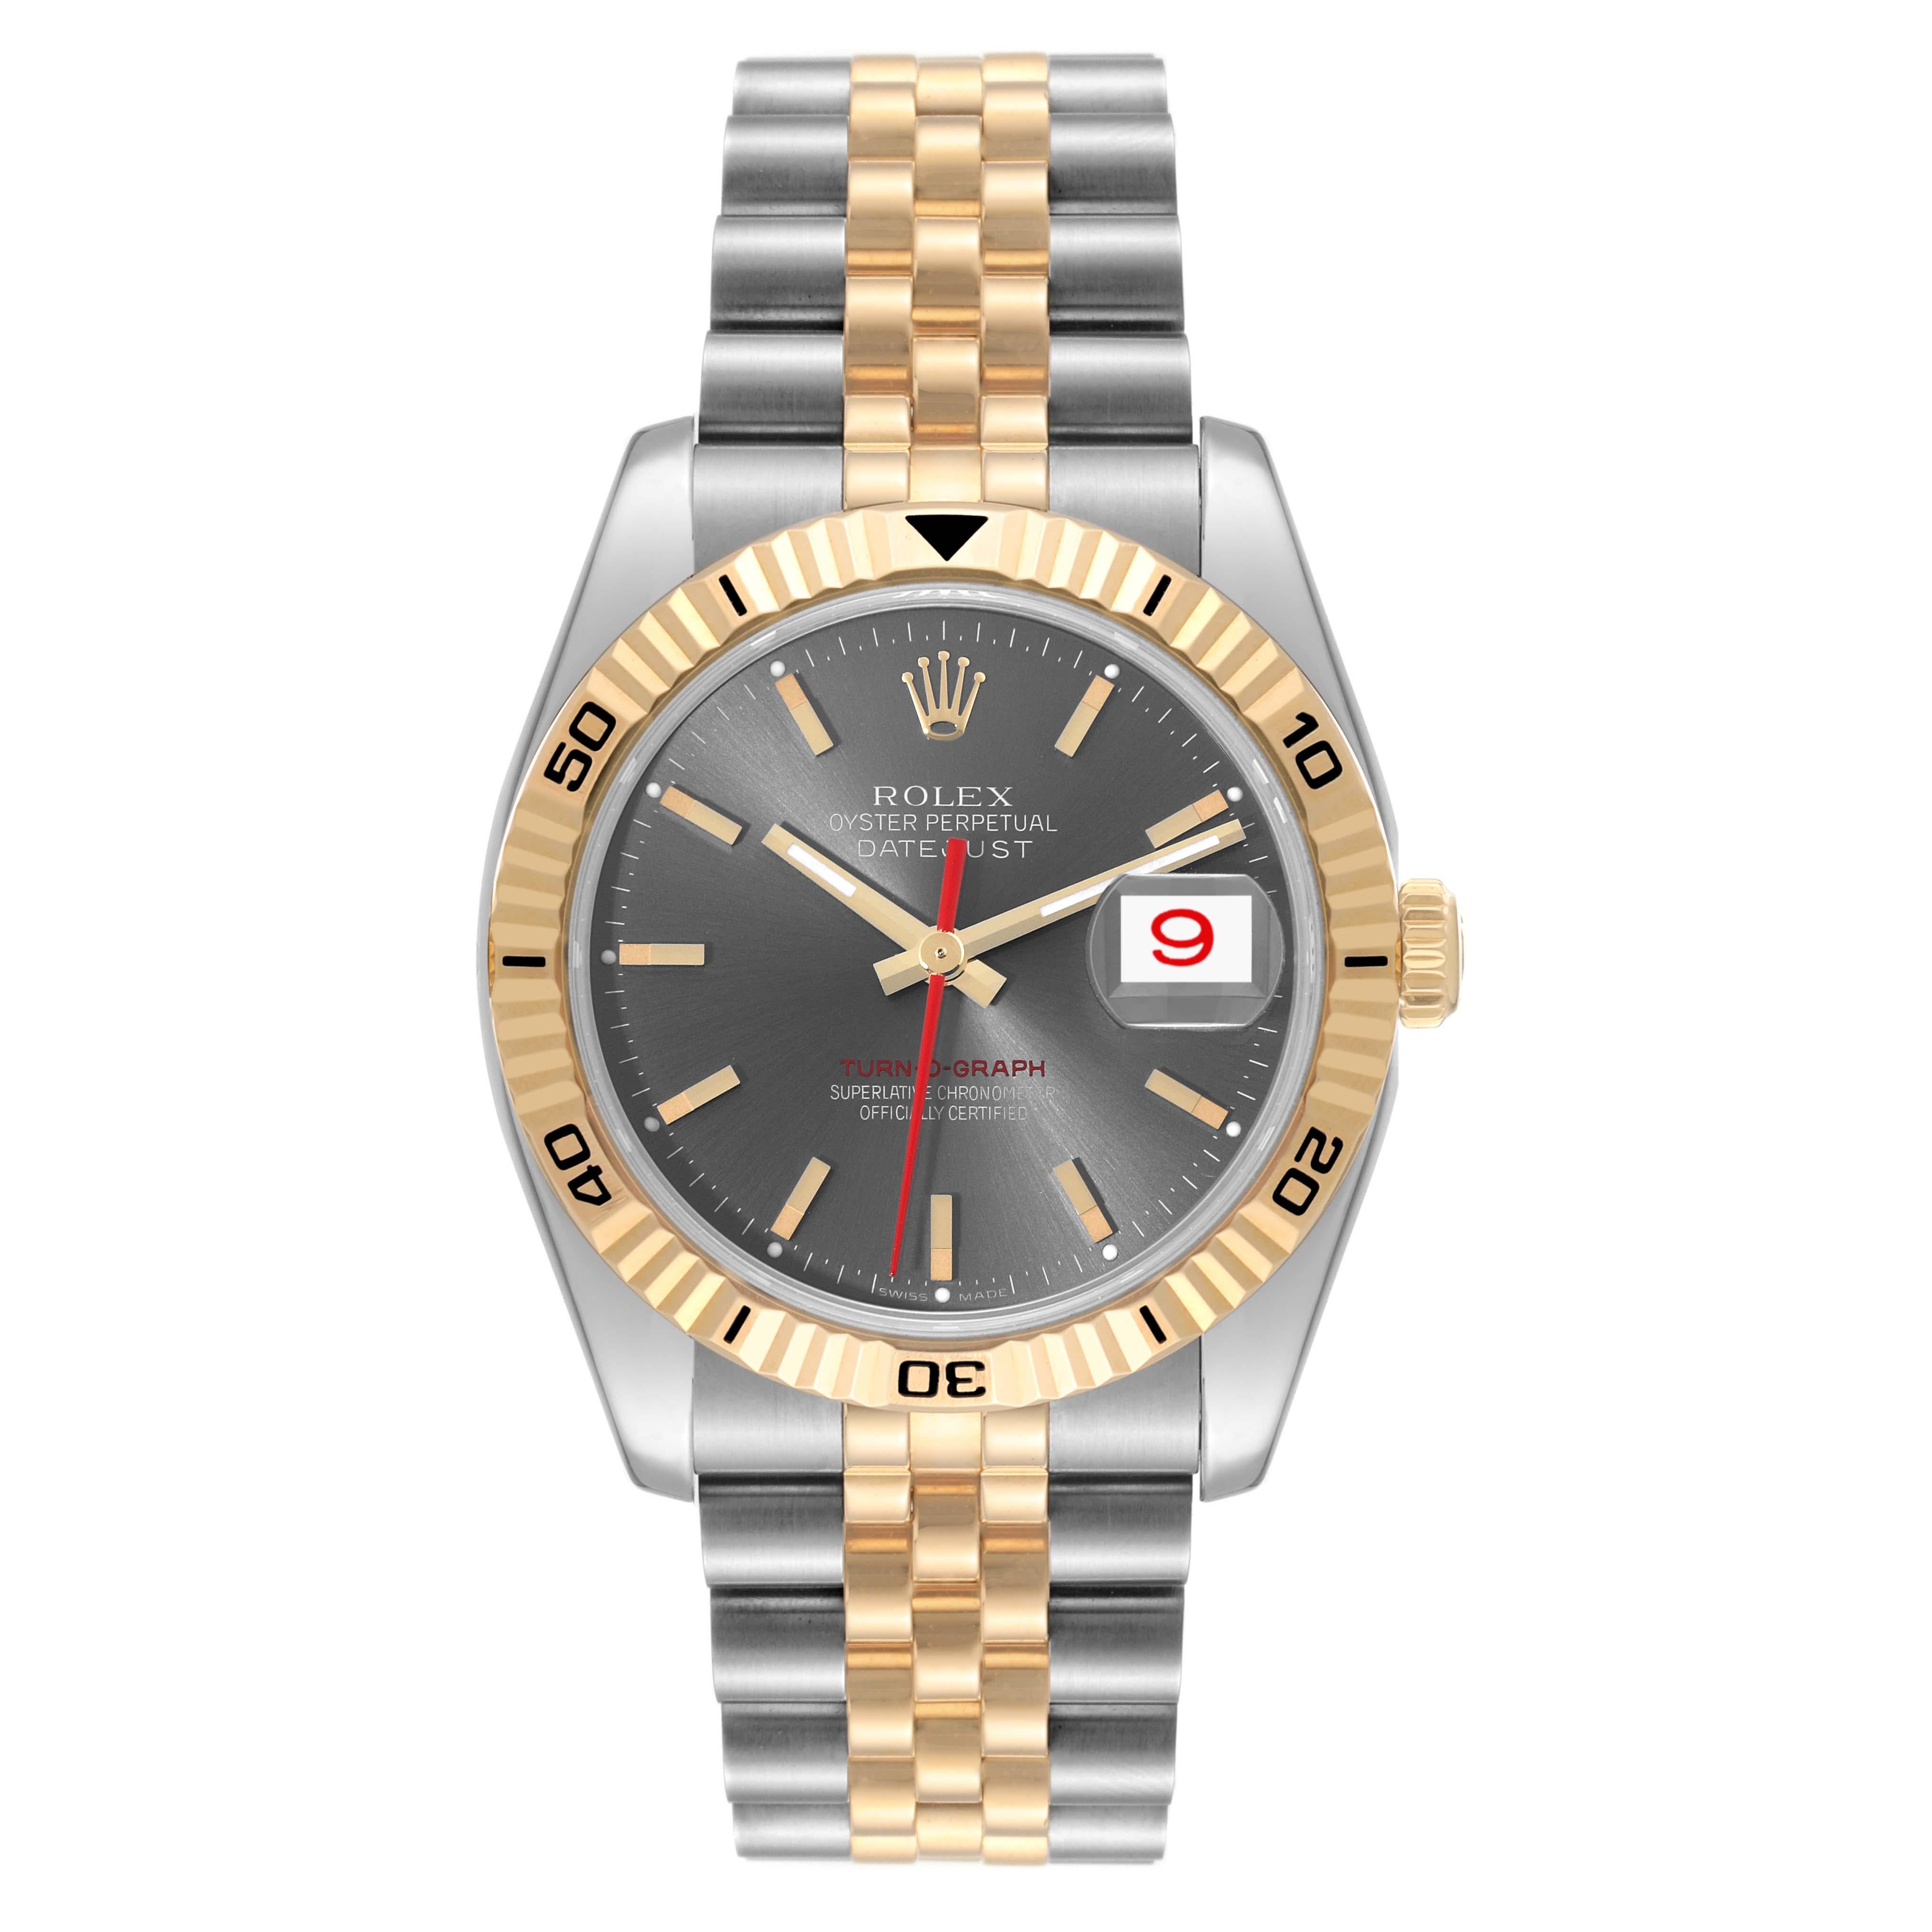 Rolex Datejust Turnograph Steel Yellow Gold Mens Watch 116263 Box Card. Officially certified chronometer automatic self-winding movement with quickset date function. Stainless steel and 18K yellow gold case 36.0 mm in diameter. Rolex logo on the